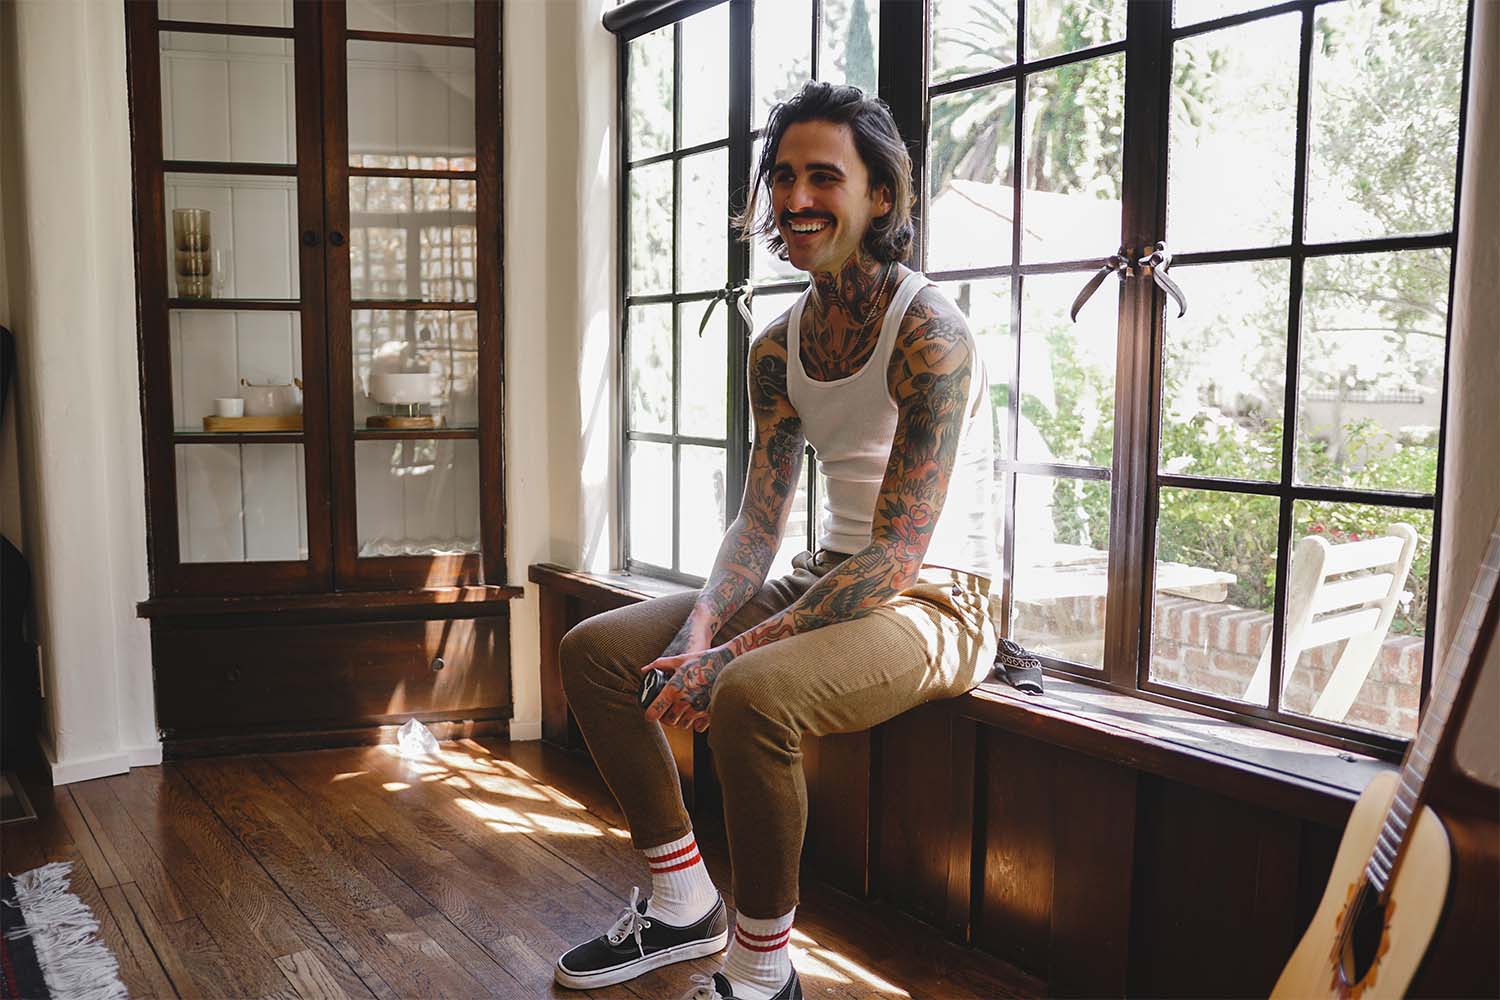 Trends In many restaurants chef attire now includes tattoos  Twin Cities